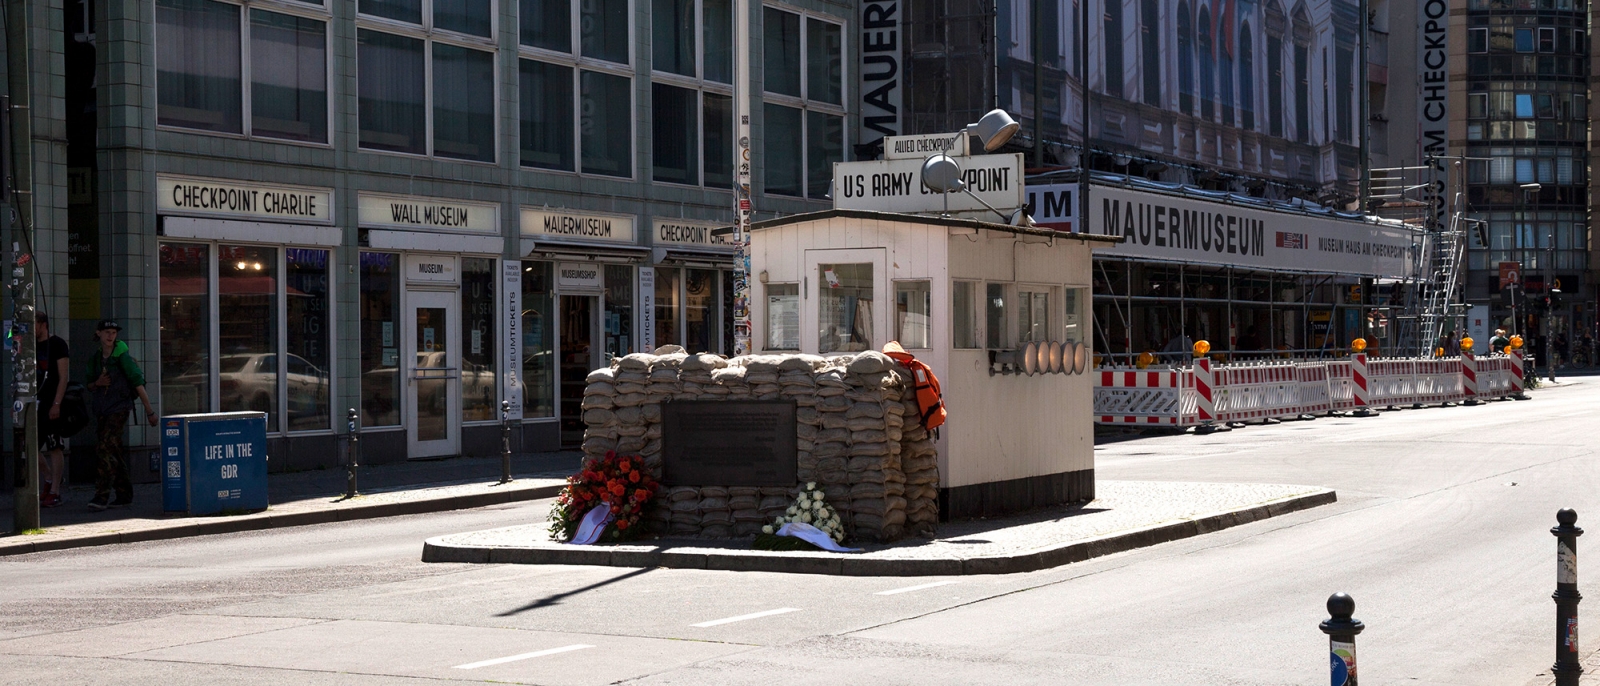 View of Checkpoint Charlie